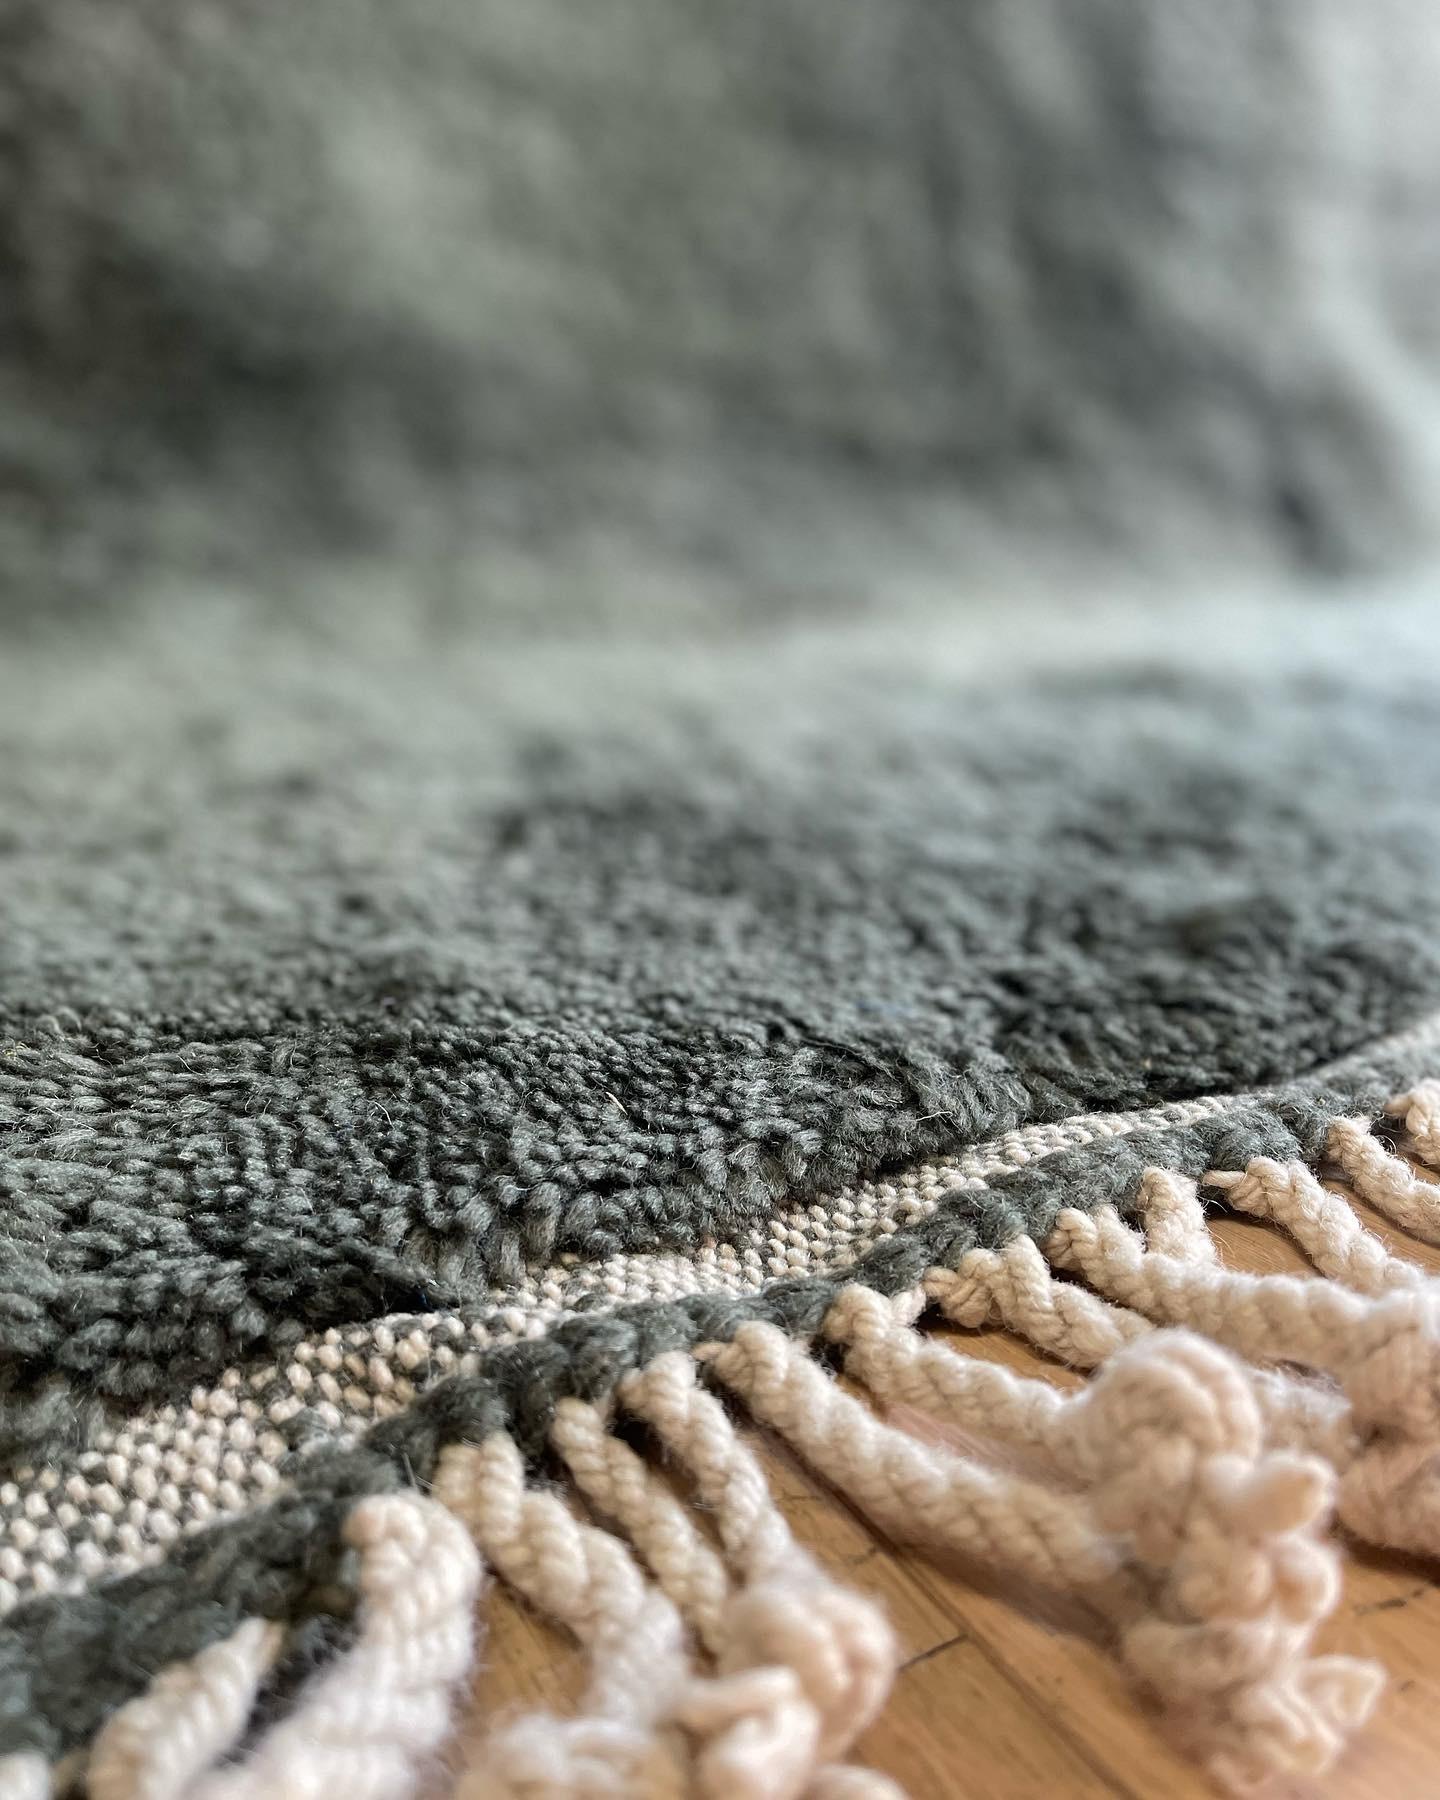 Every rug owns its unique identity.
Having a one of a kind rug at home with a beautiful backstory represents a life filled with historic and meaningful backgrounds.
Each and every one of our rugs take long hours to complete with extreme attention to